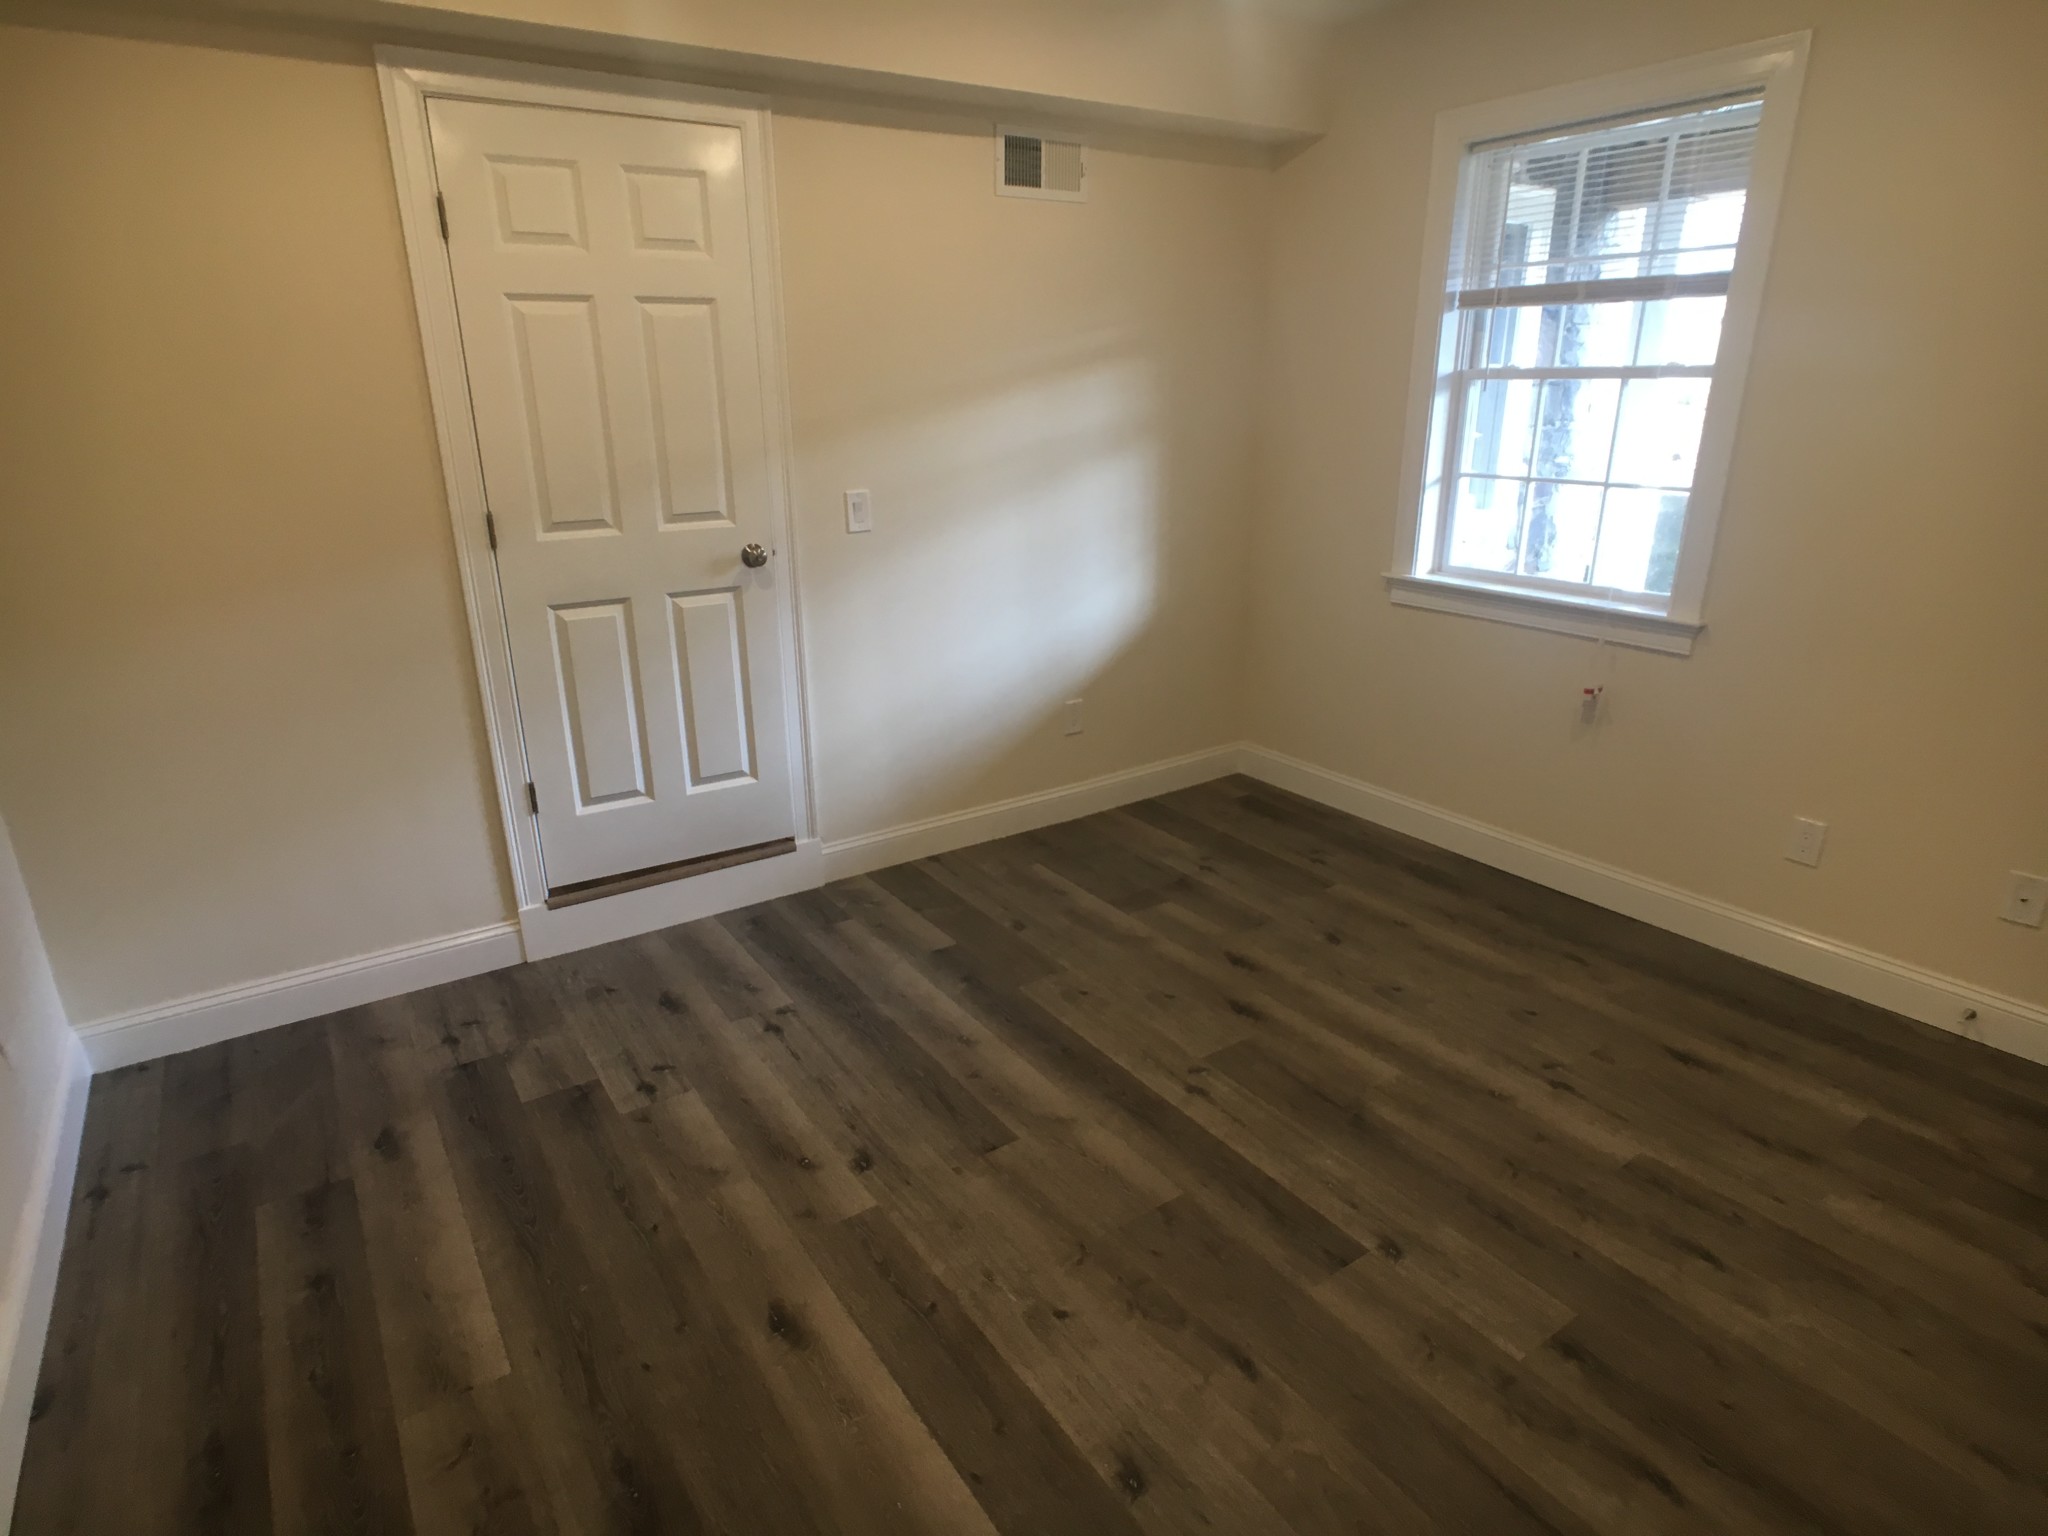 Photos of apartment on Marion,Medford MA 02155